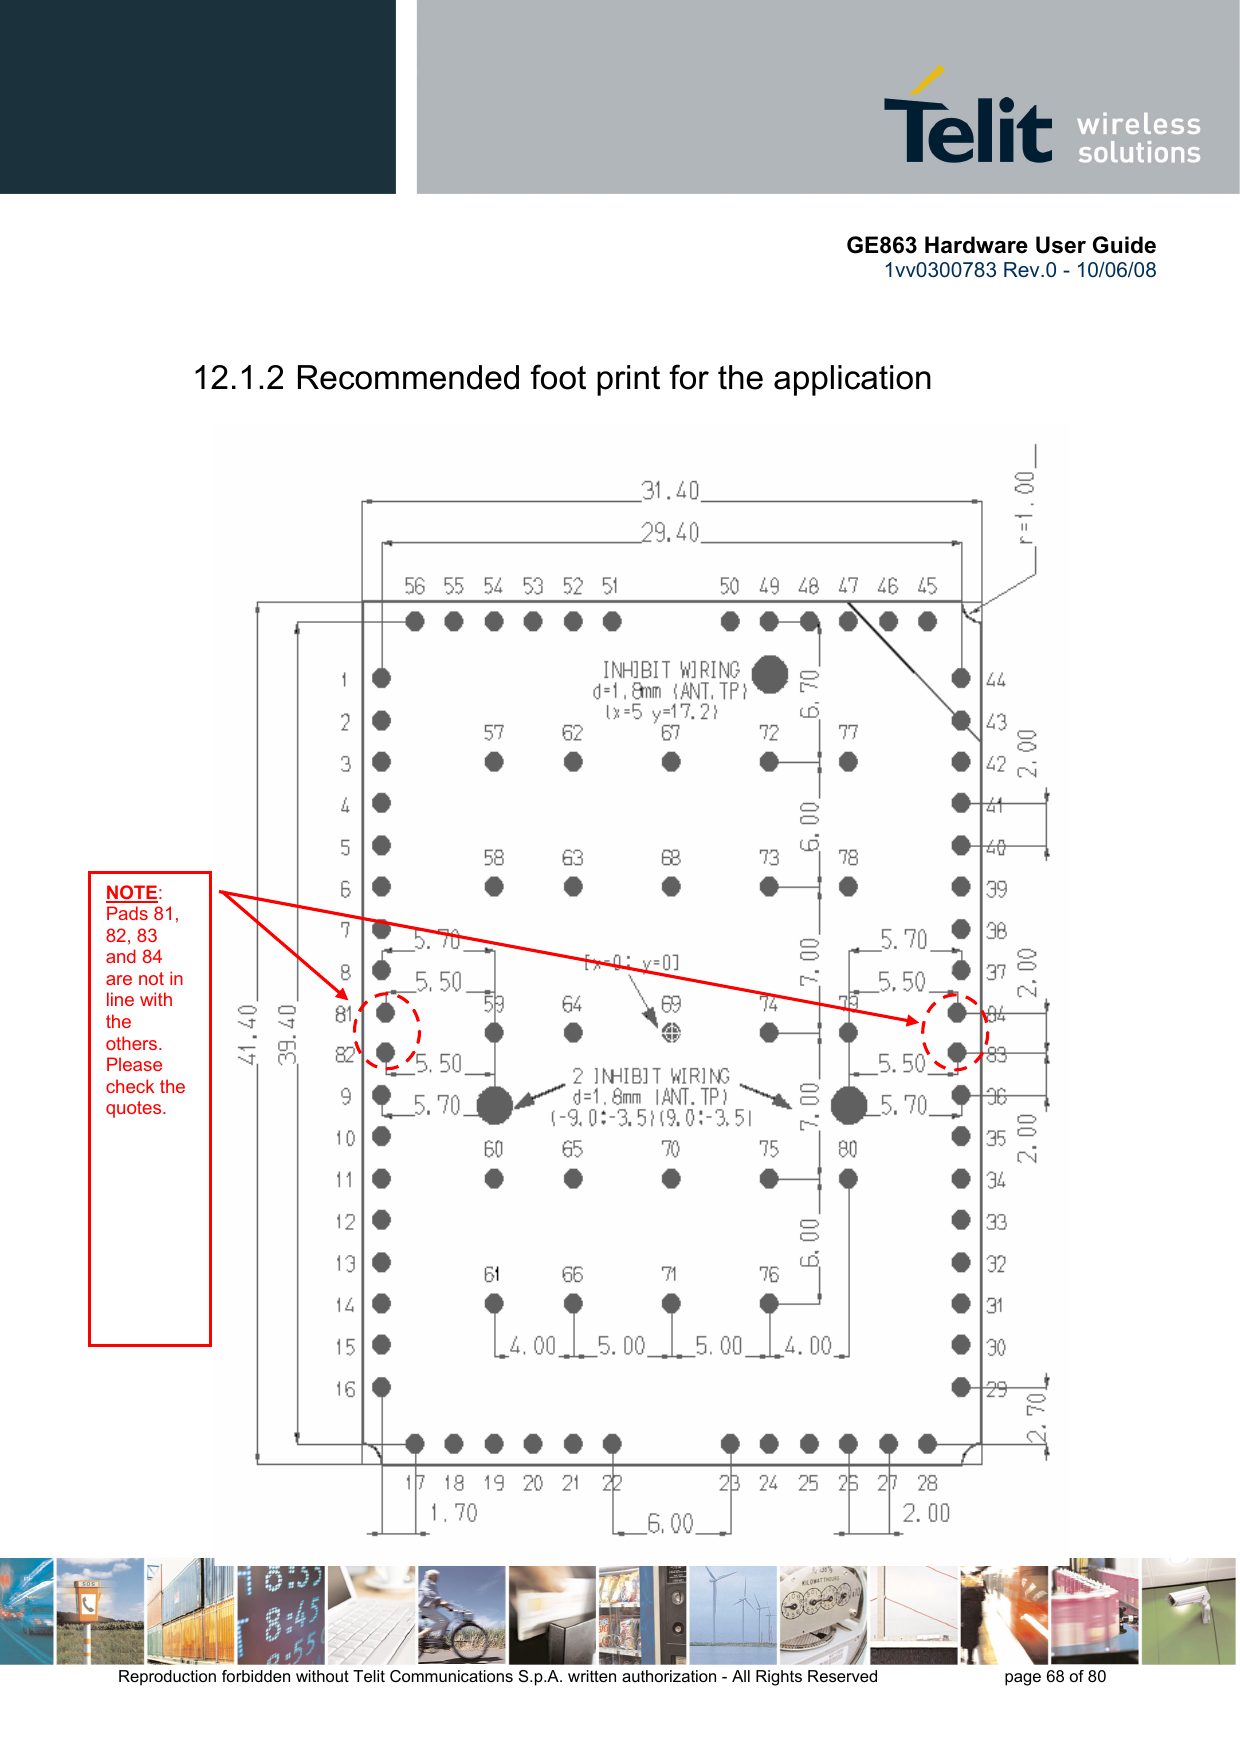       GE863 Hardware User Guide 1vv0300783 Rev.0 - 10/06/08 Reproduction forbidden without Telit Communications S.p.A. written authorization - All Rights Reserved    page 68 of 80   12.1.2 Recommended foot print for the application                                              NOTE: Pads 81, 82, 83 and 84 are not in line with the others. Please check the quotes. 